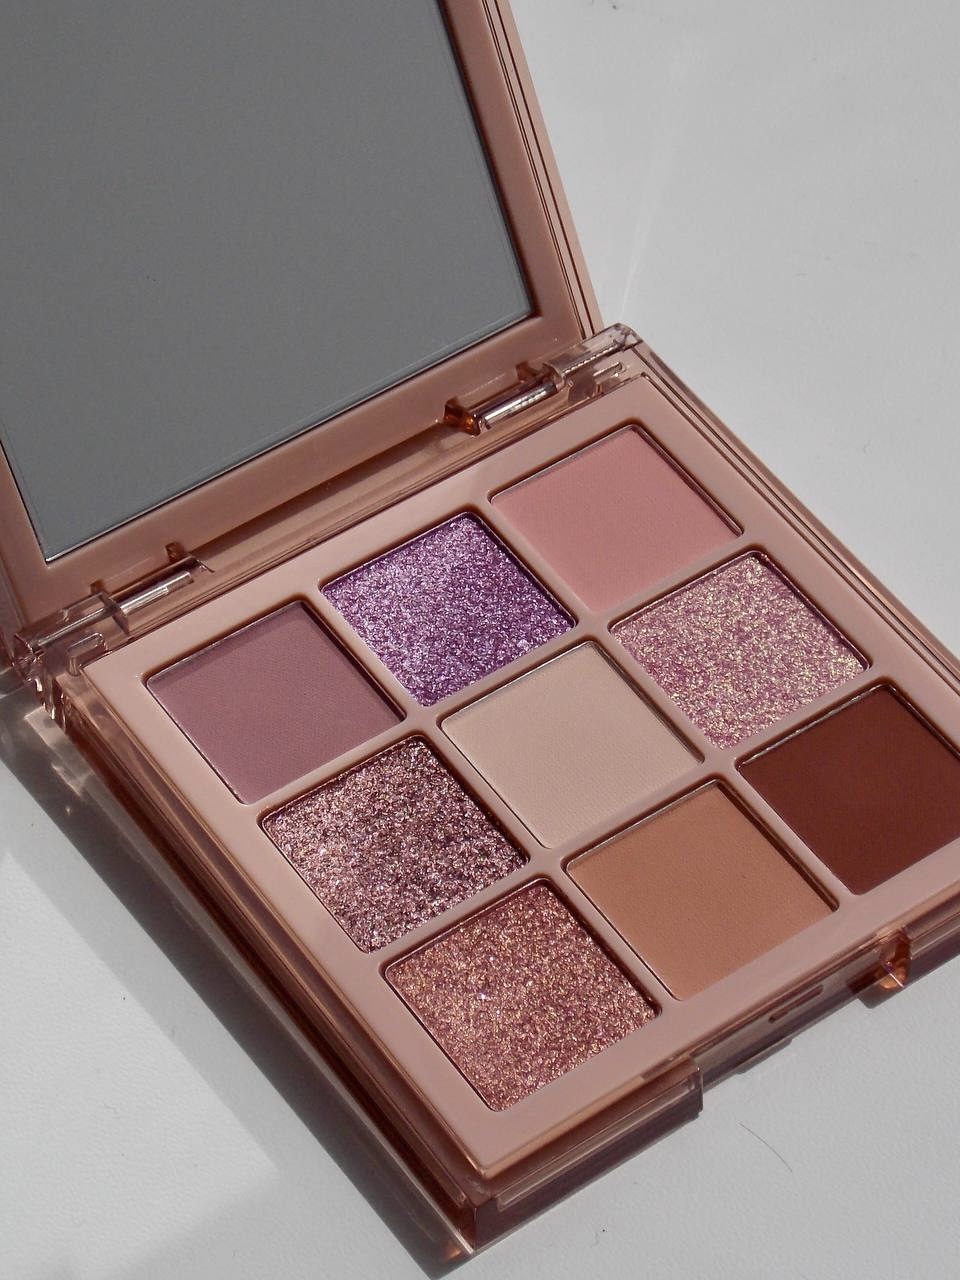 Huda Beauty Nude Obsessions Palette - Light